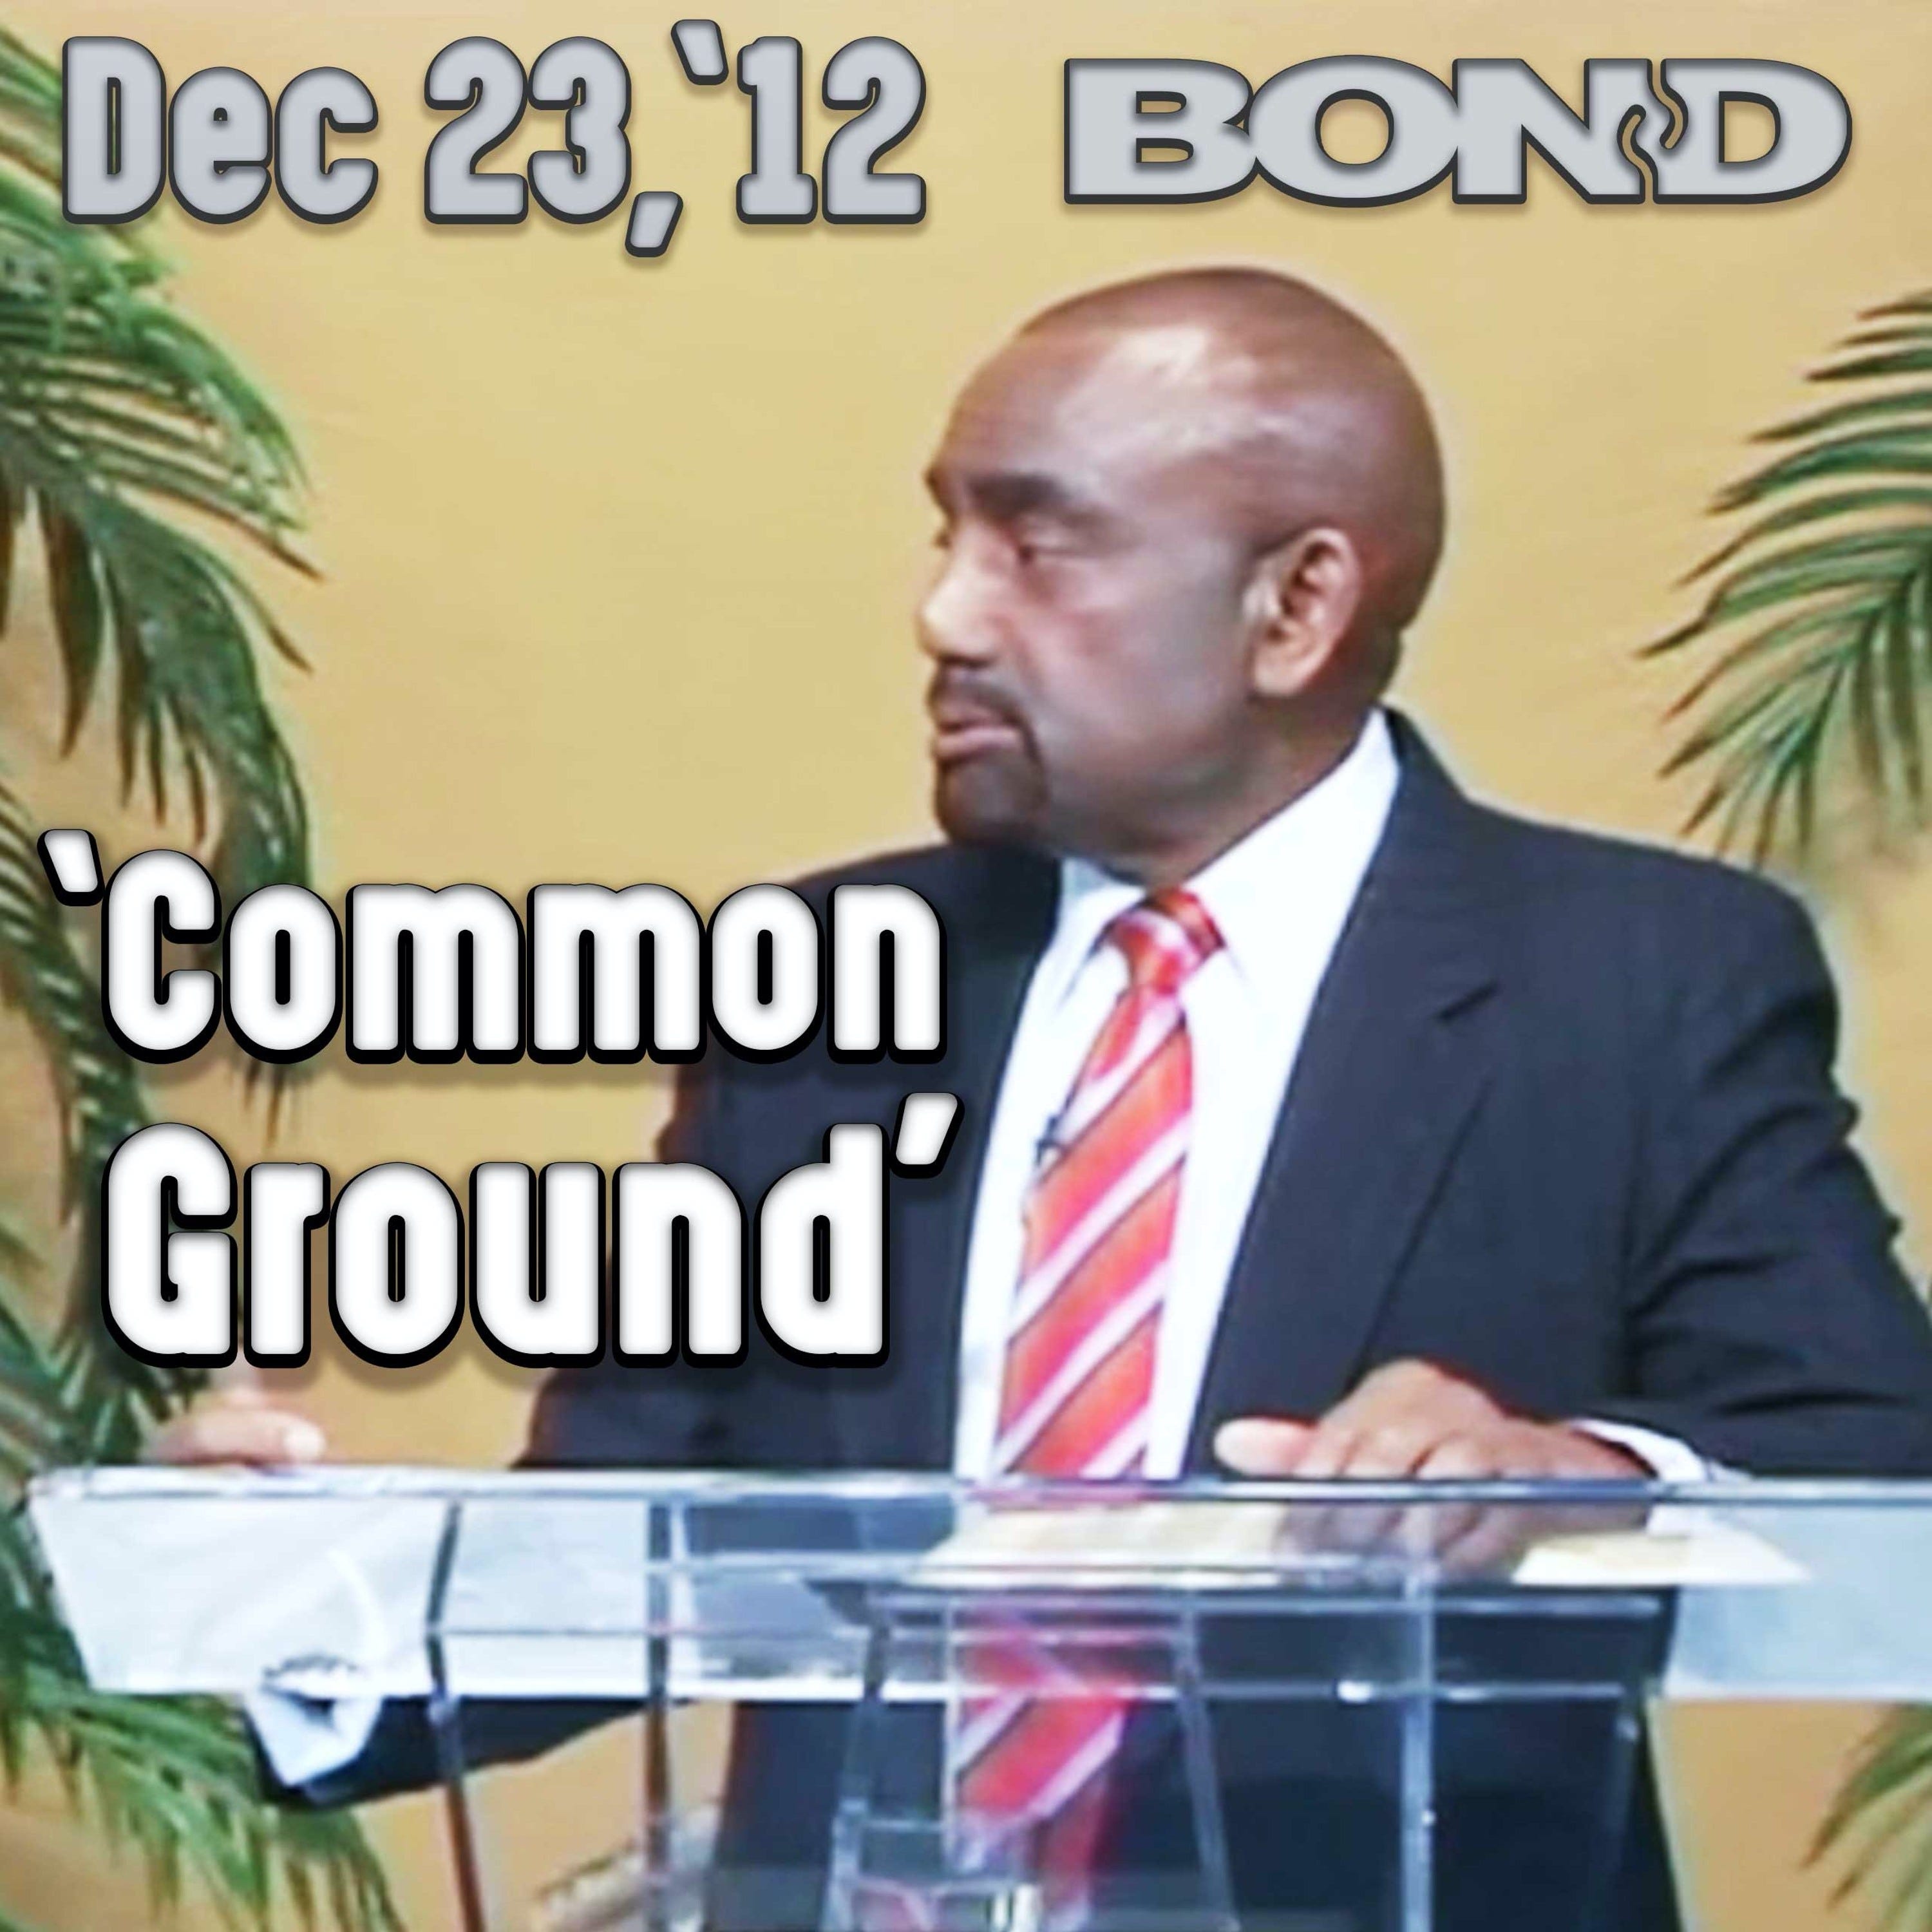 12/23/12 Can Good Find Common Ground with Evil? (Archive)